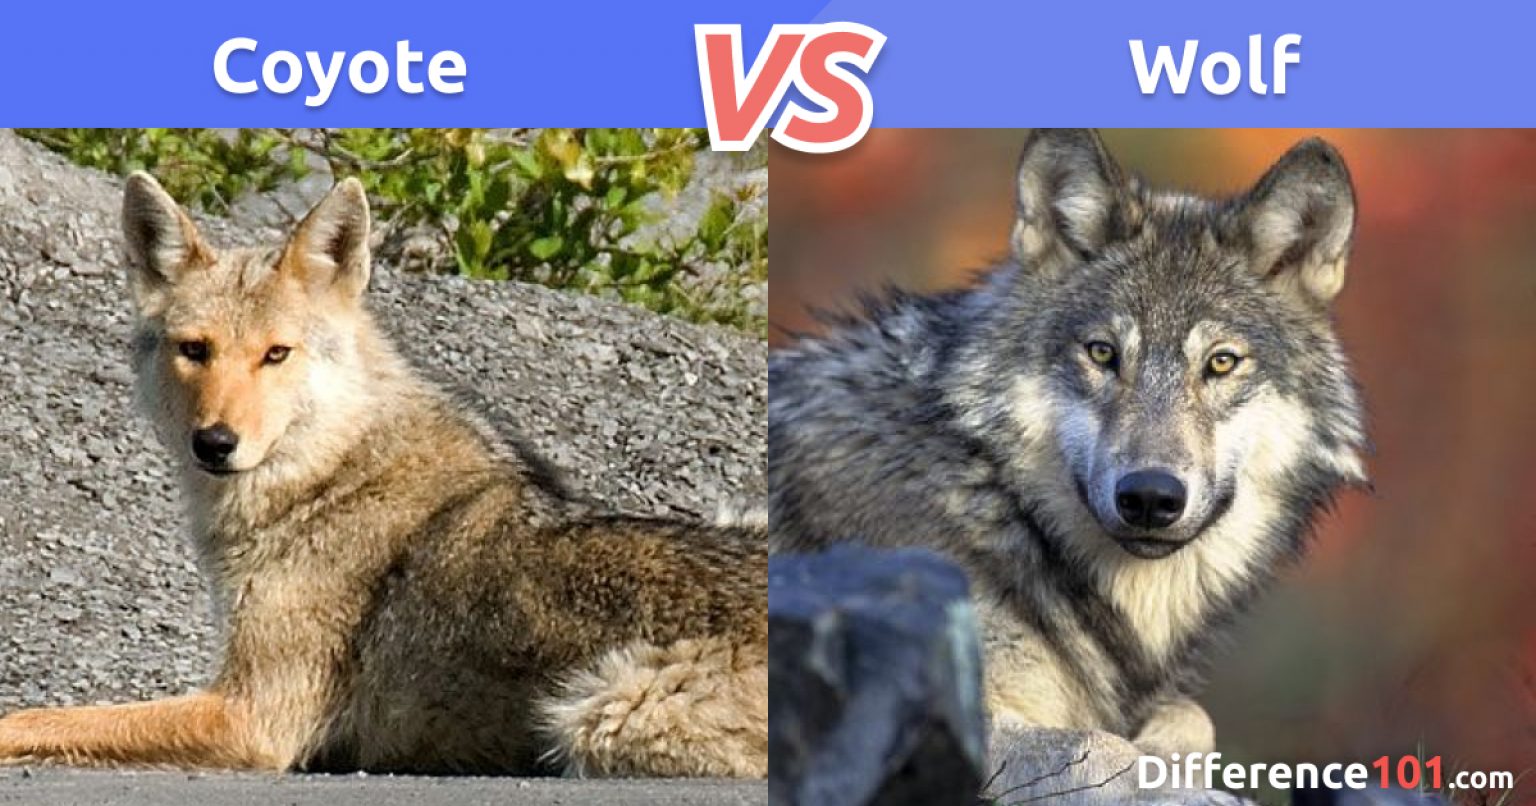 Coyote vs. Wolf: Key Differences, Pros & Cons, FAQ | Difference 101